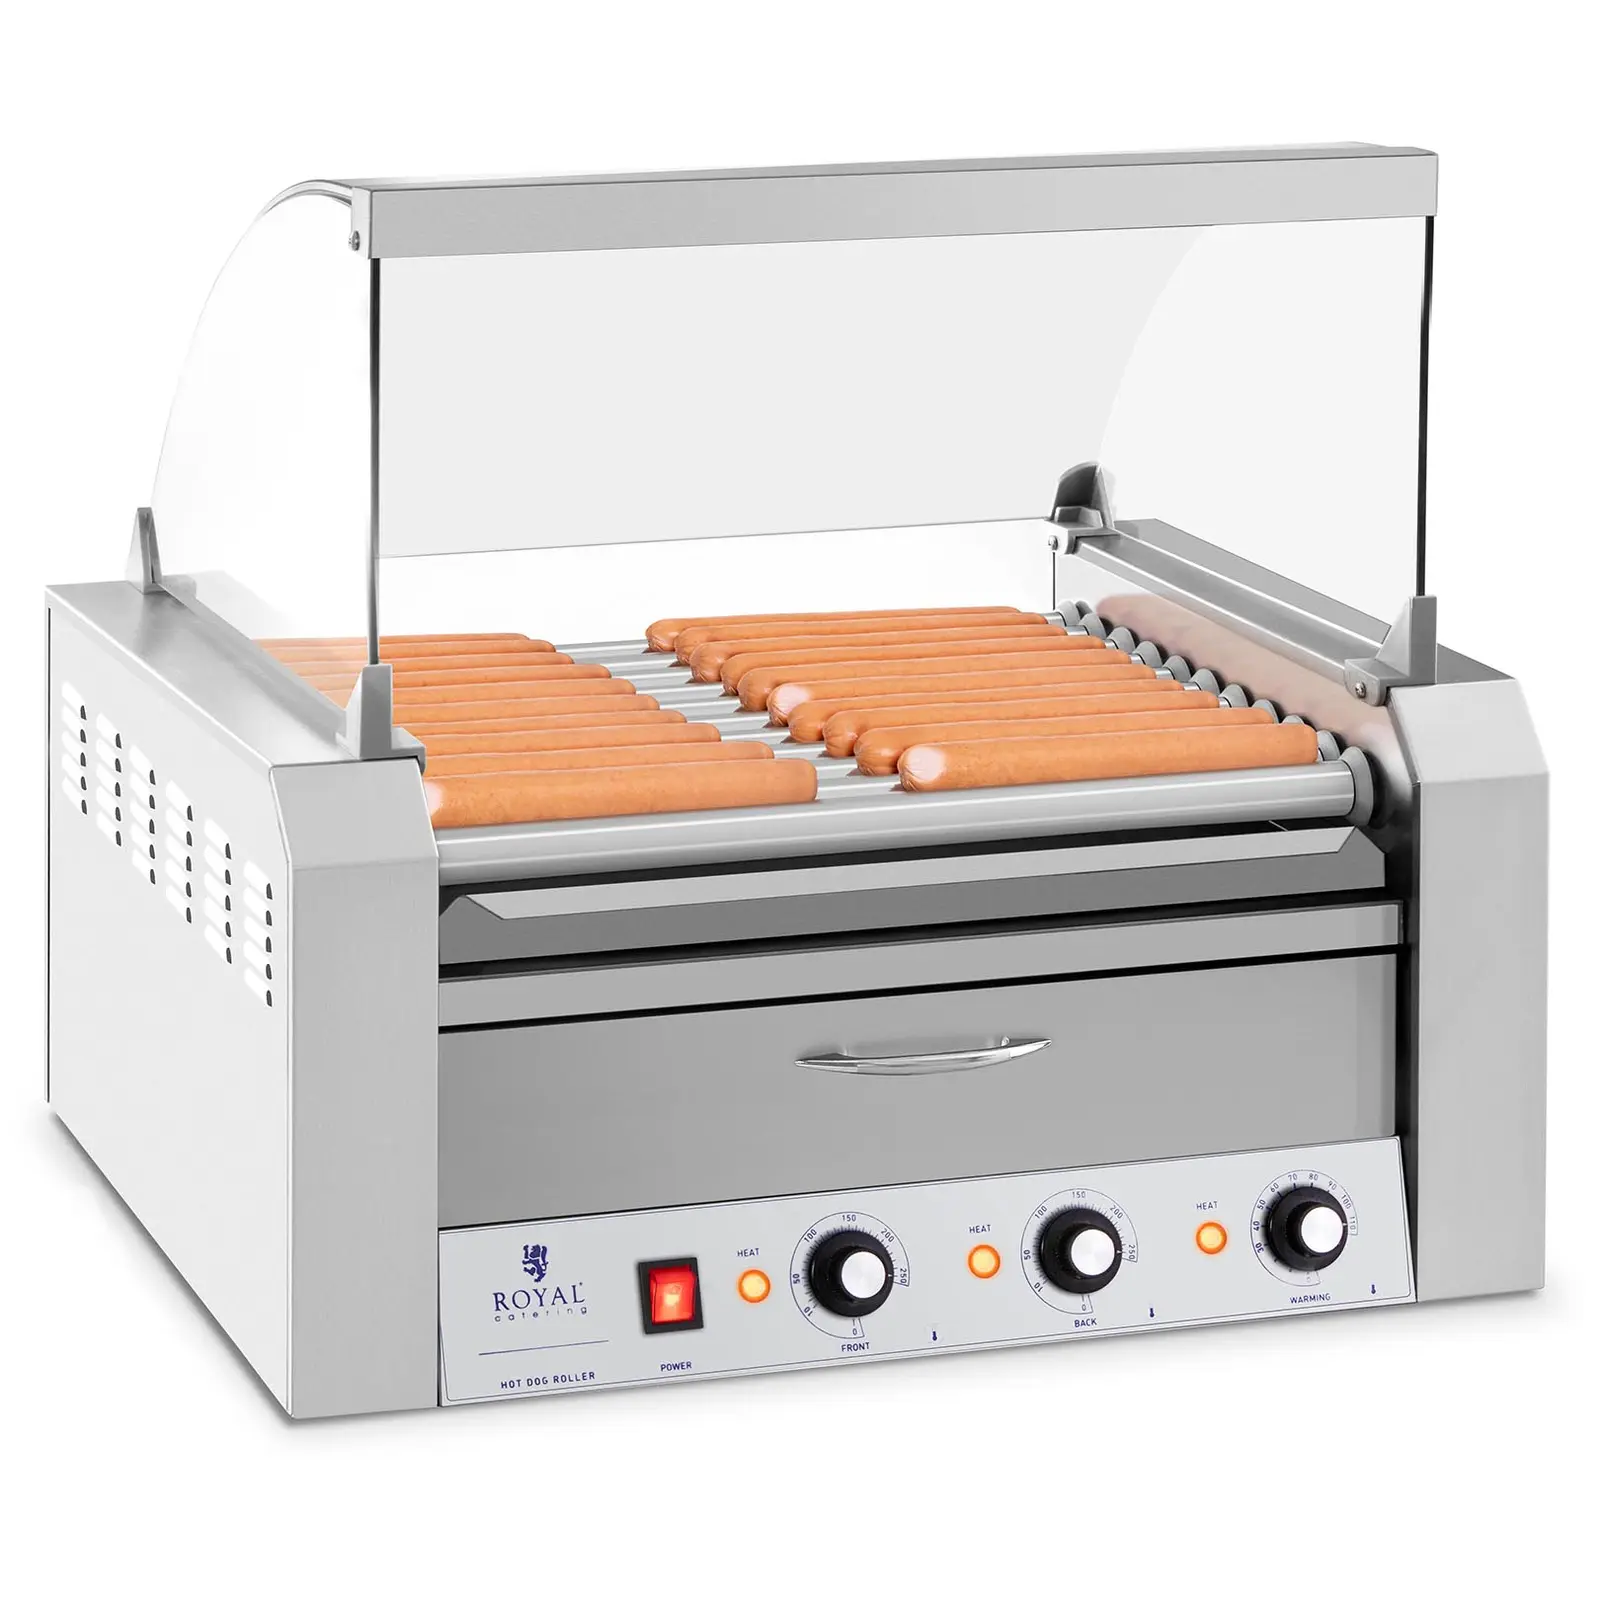 Hotdog Grill - 11 rollers - Warming drawers - Stainless steel